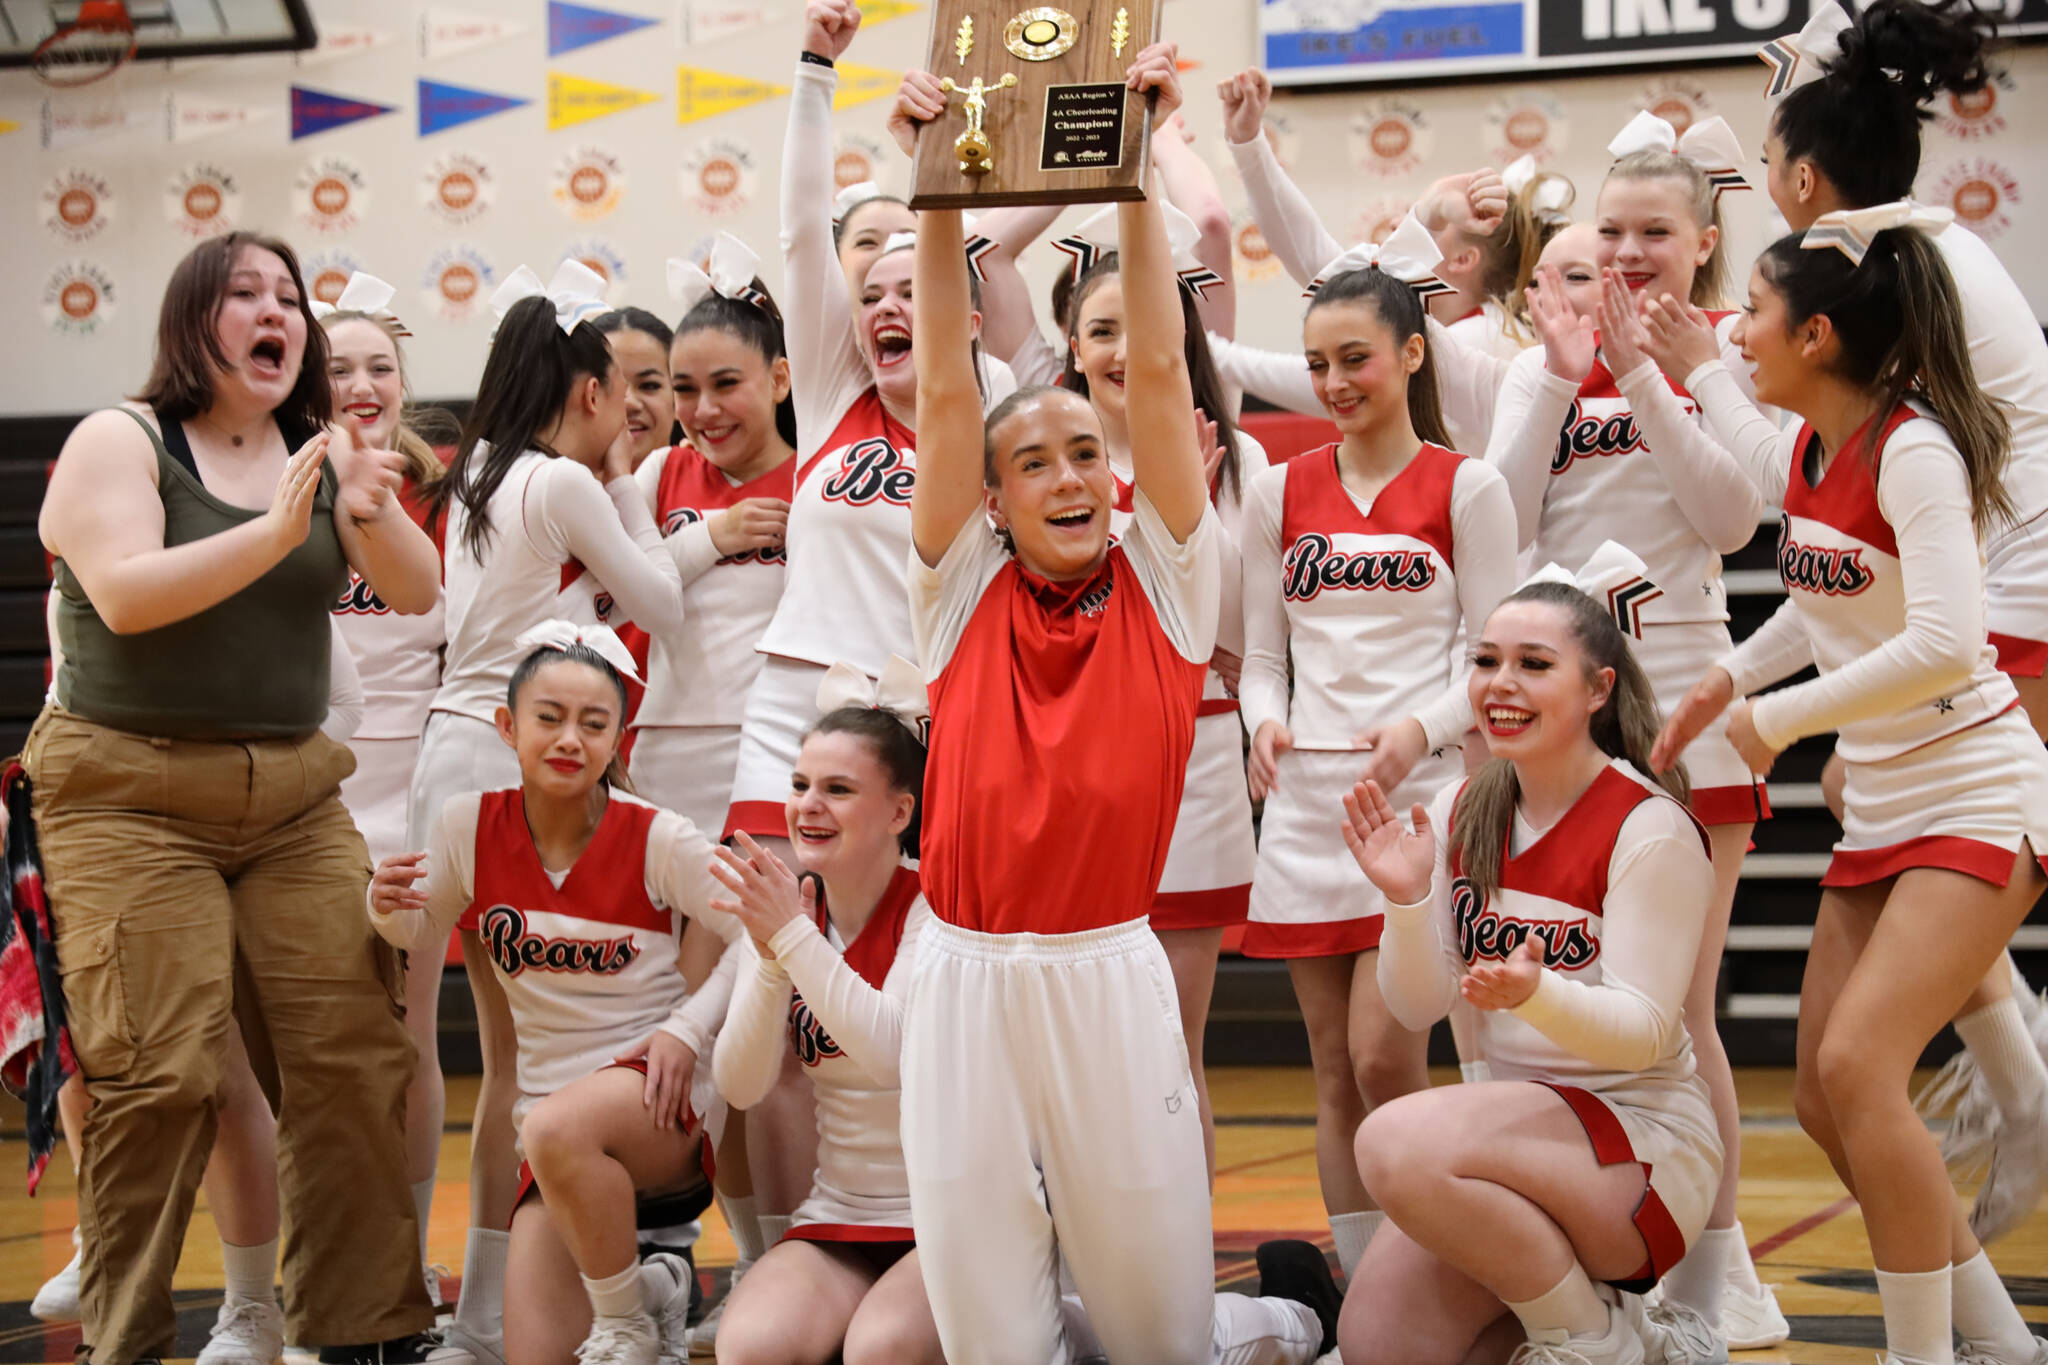 Emotions were high as JDHS cheer took home the 4A division championship title for the third year in a row during the annual Region V 2A/4A dance adjudication competition hosted at Juneau-Douglas High School:Yadaa.at Kalé Saturday afternoon. (Clarise Larson / Juneau Empire)